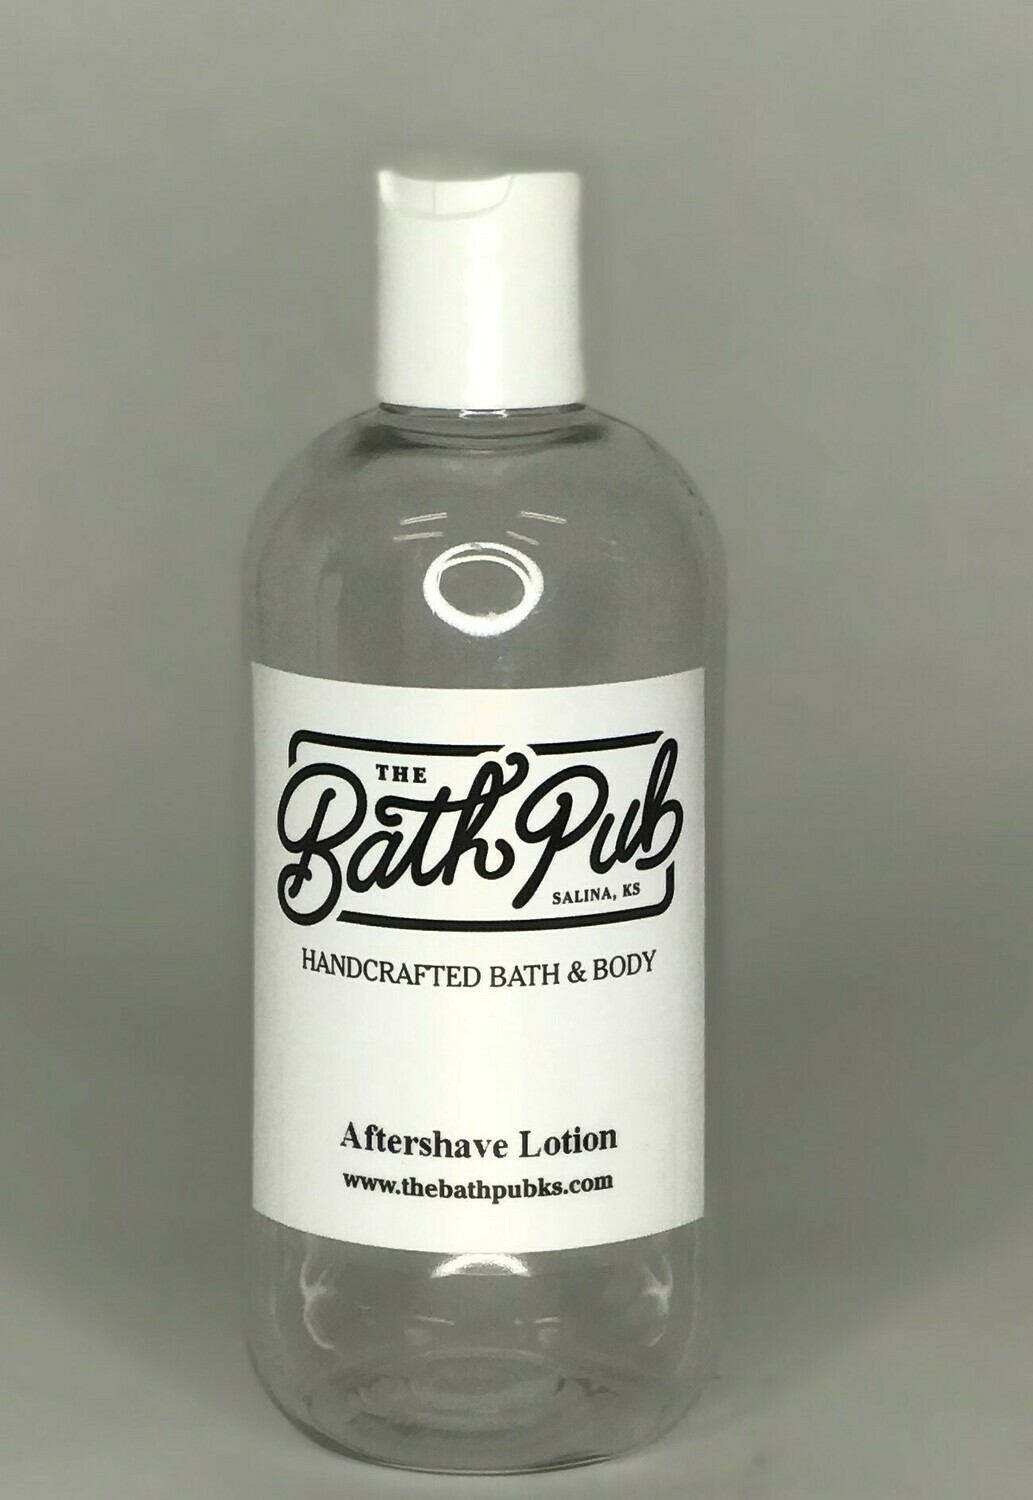 AFTER SHAVE LOTION 8 OZ